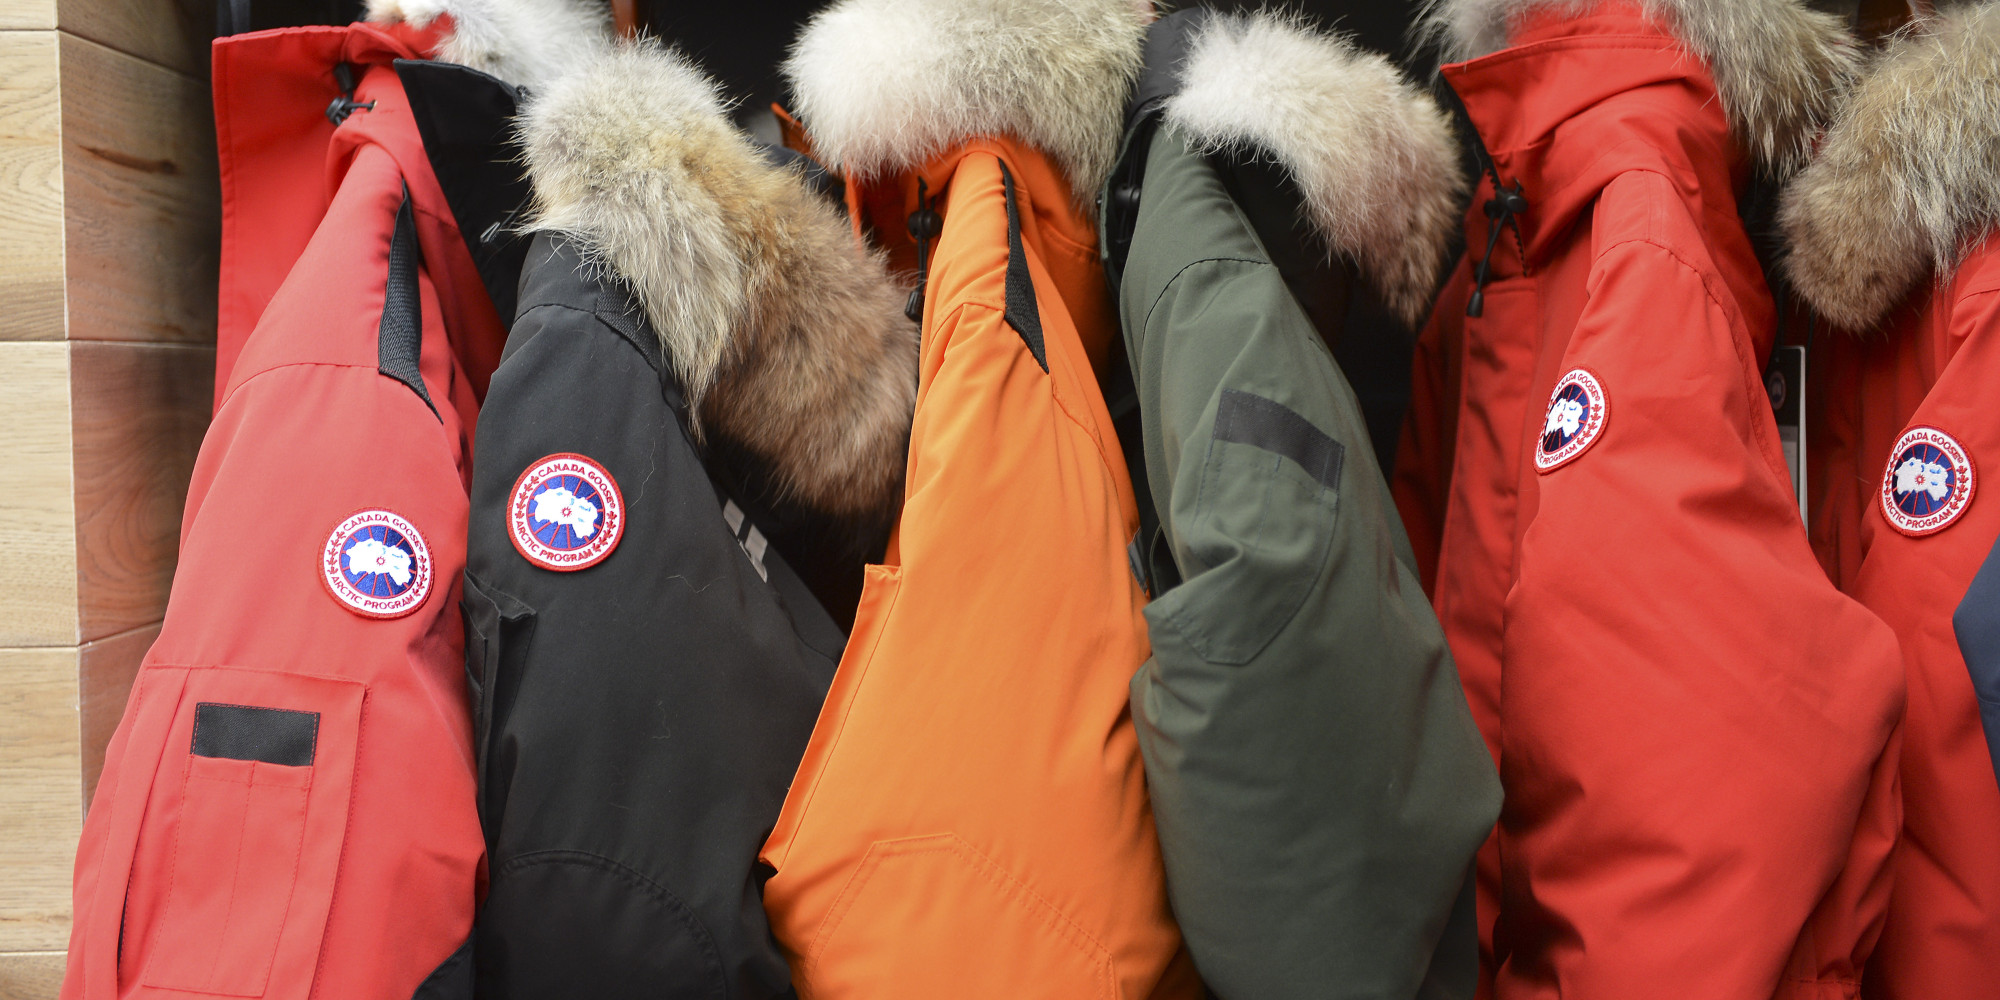 Canada Goose jackets sale 2016 - Canada Goose Stores Coming To Toronto, New York City